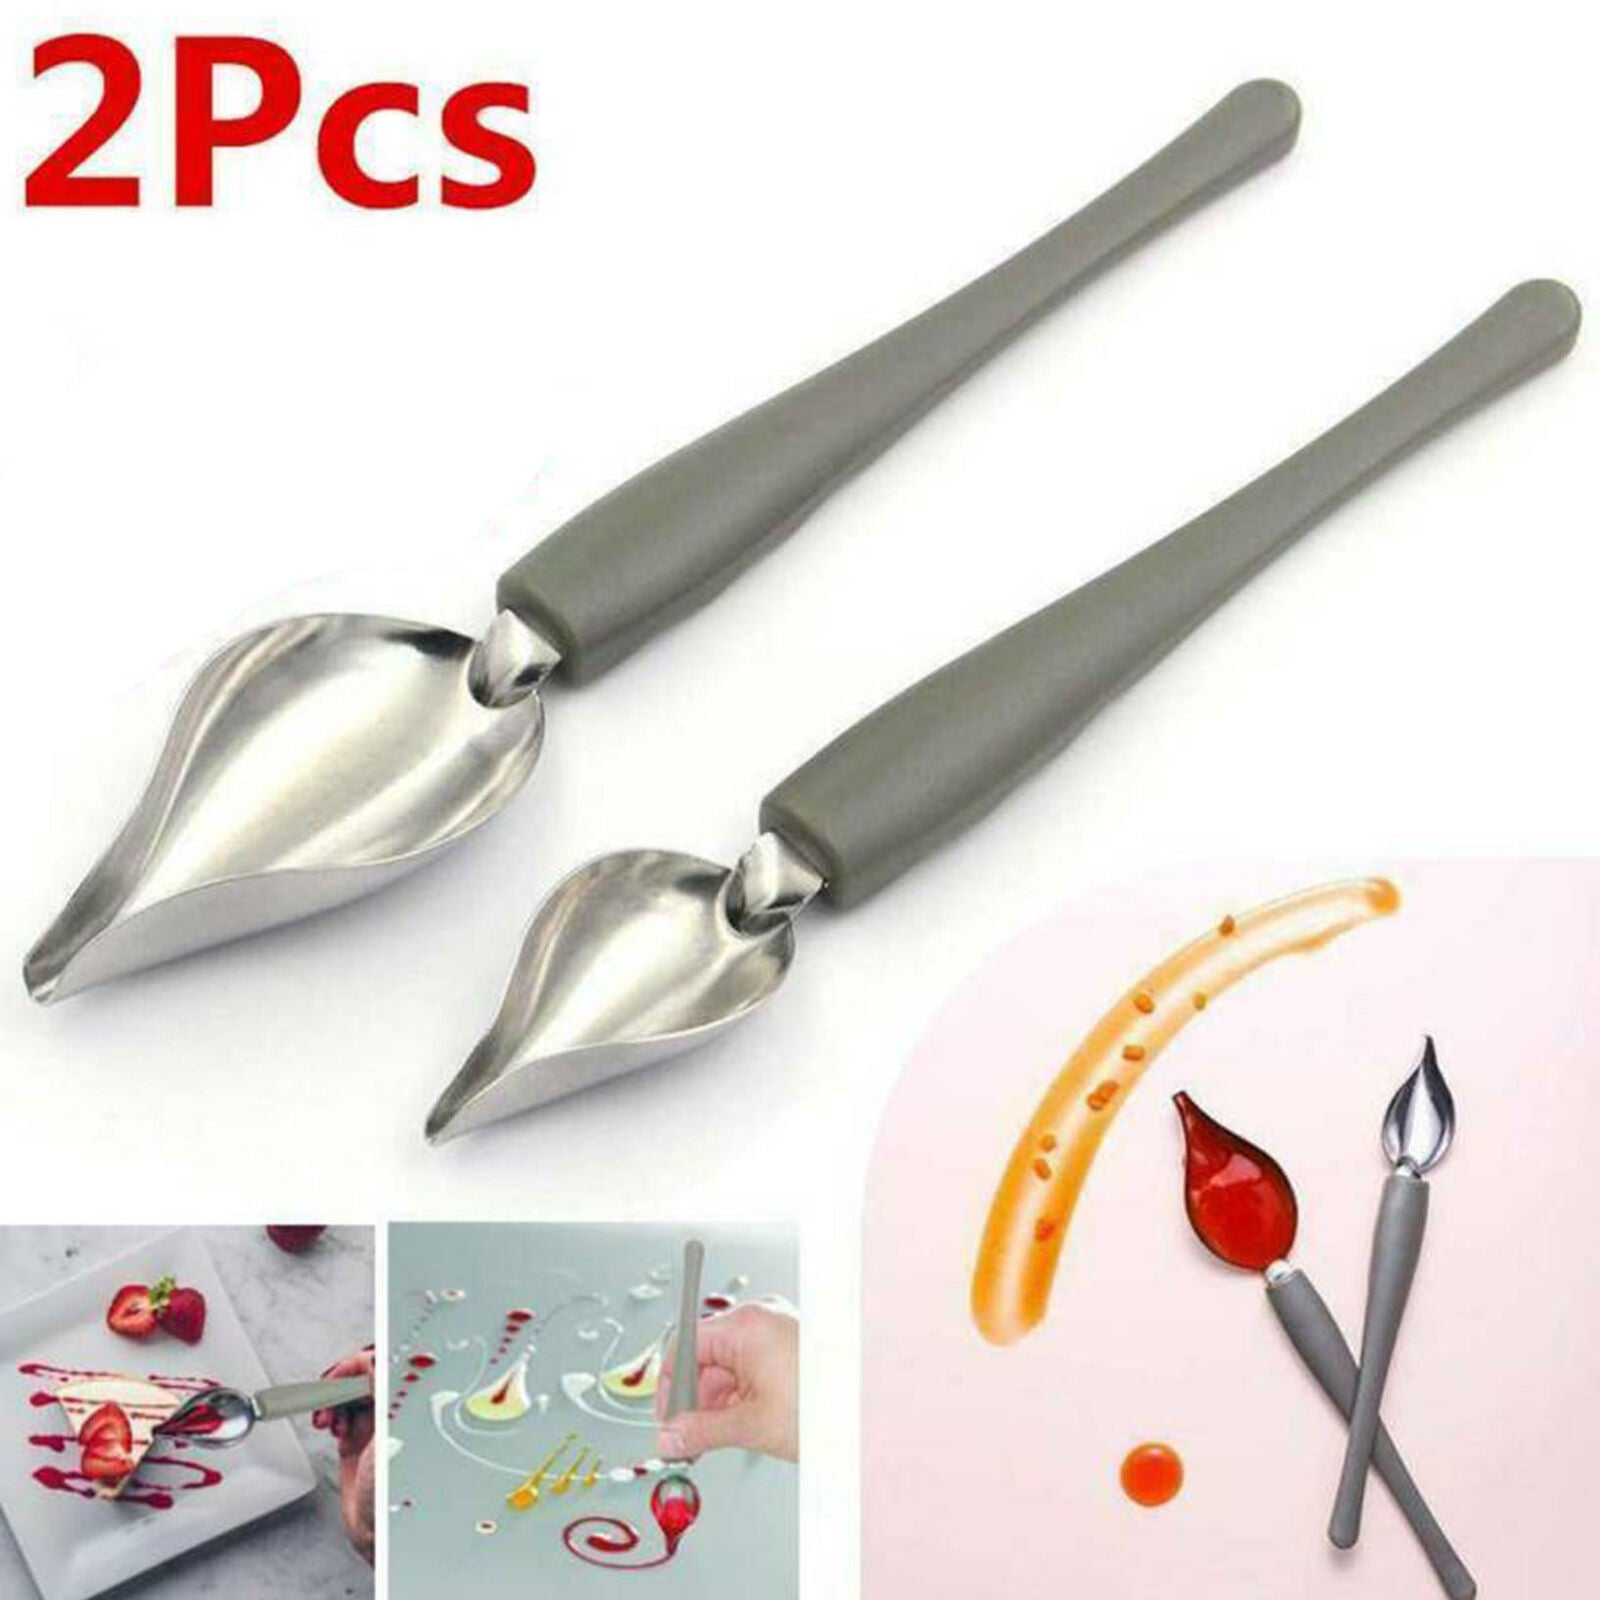 2PCS Chef Valon Sauce Plating Art Pencil Dish Draw Tool Spoon Stainless Steel